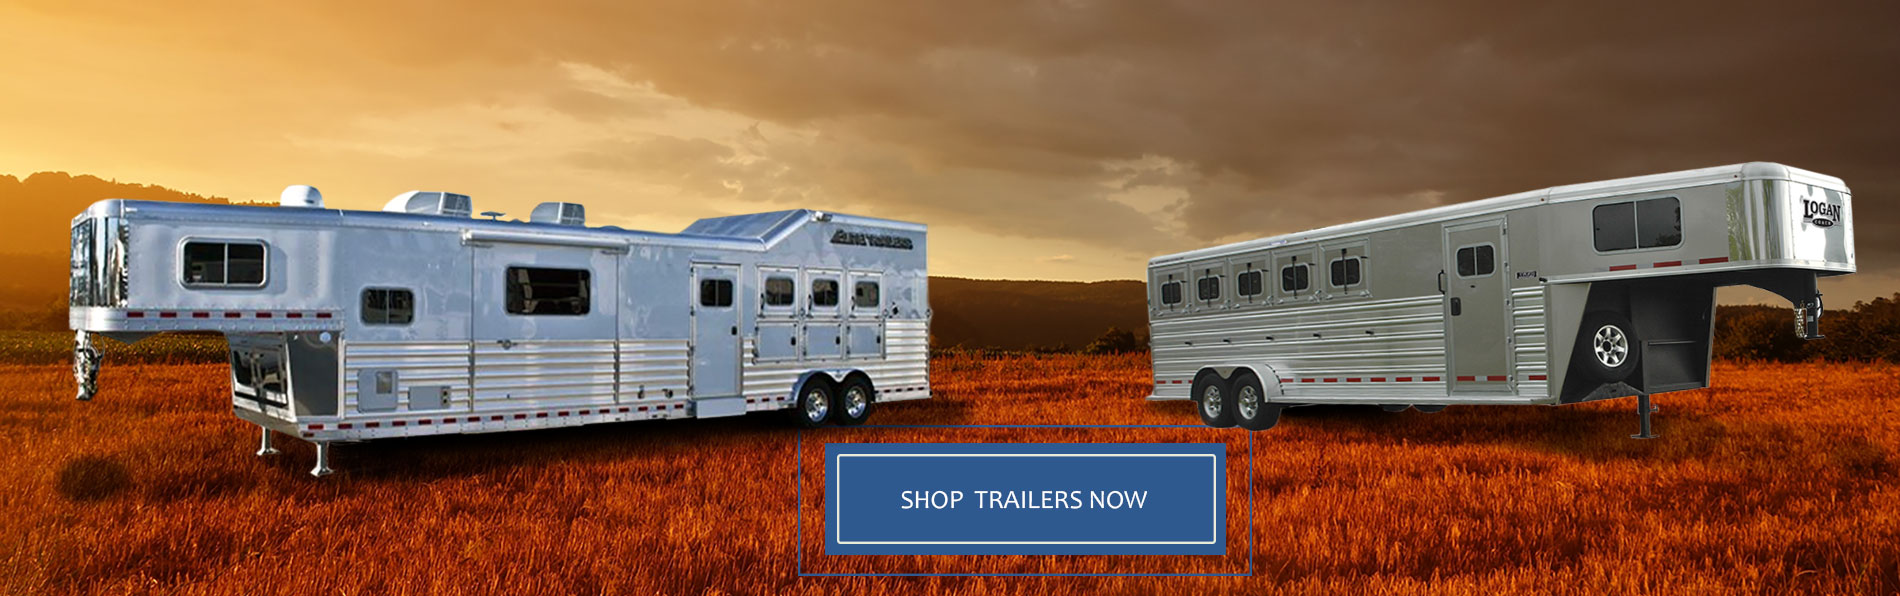 Search Elite and Logan Coach trailers for sale